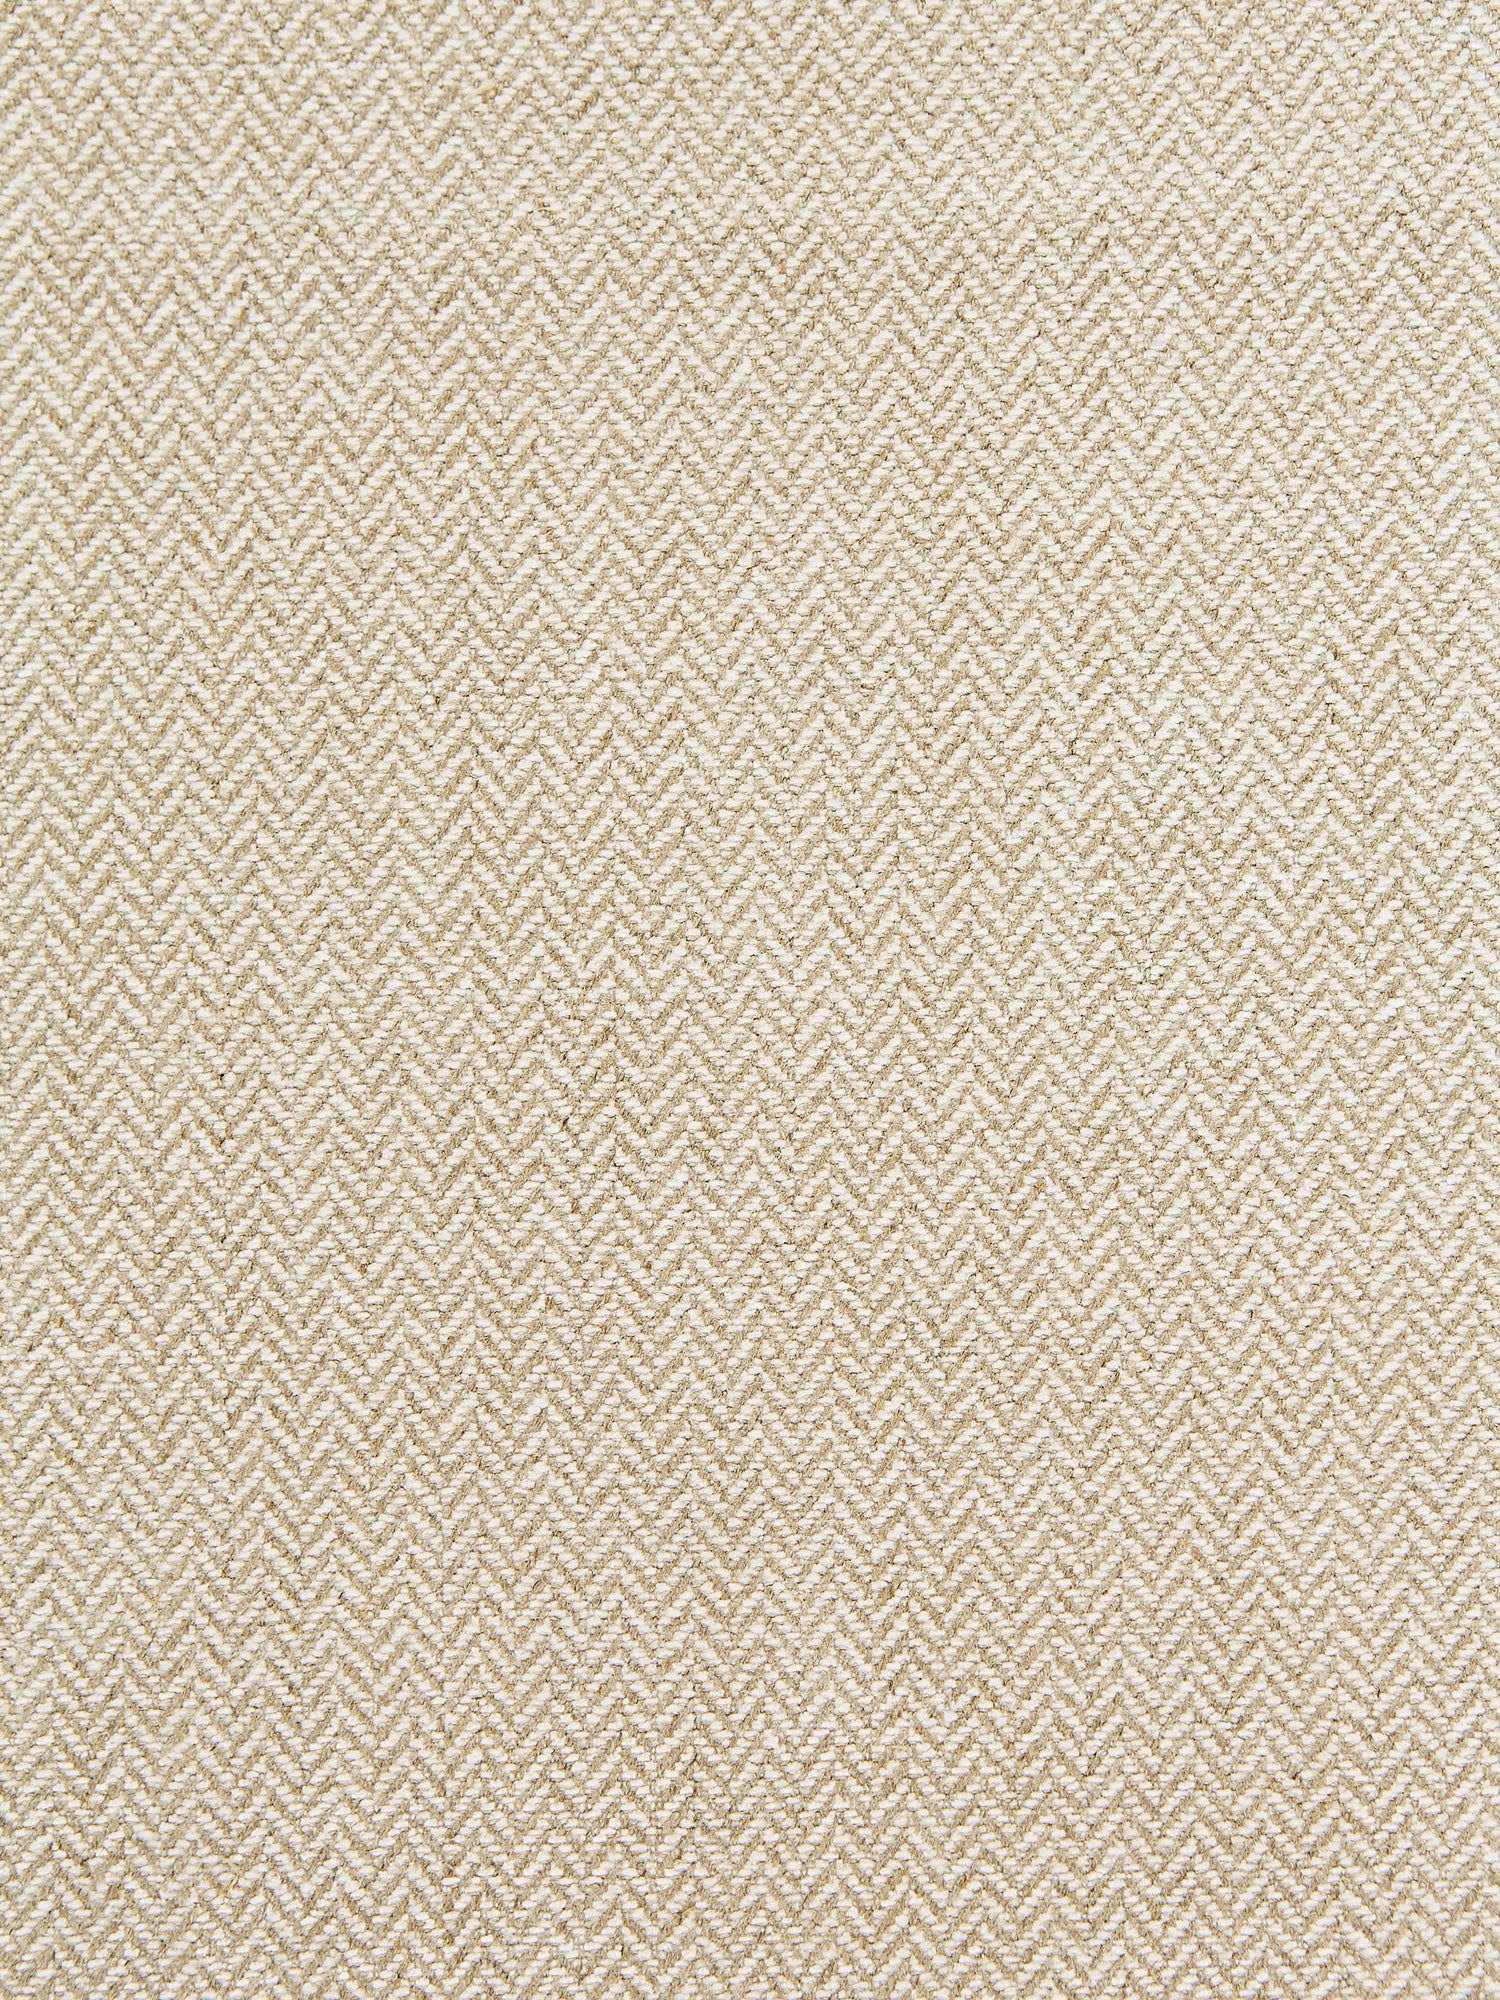 Oxford Herringbone Weave fabric in flax color - pattern number SC 000127006 - by Scalamandre in the Scalamandre Fabrics Book 1 collection